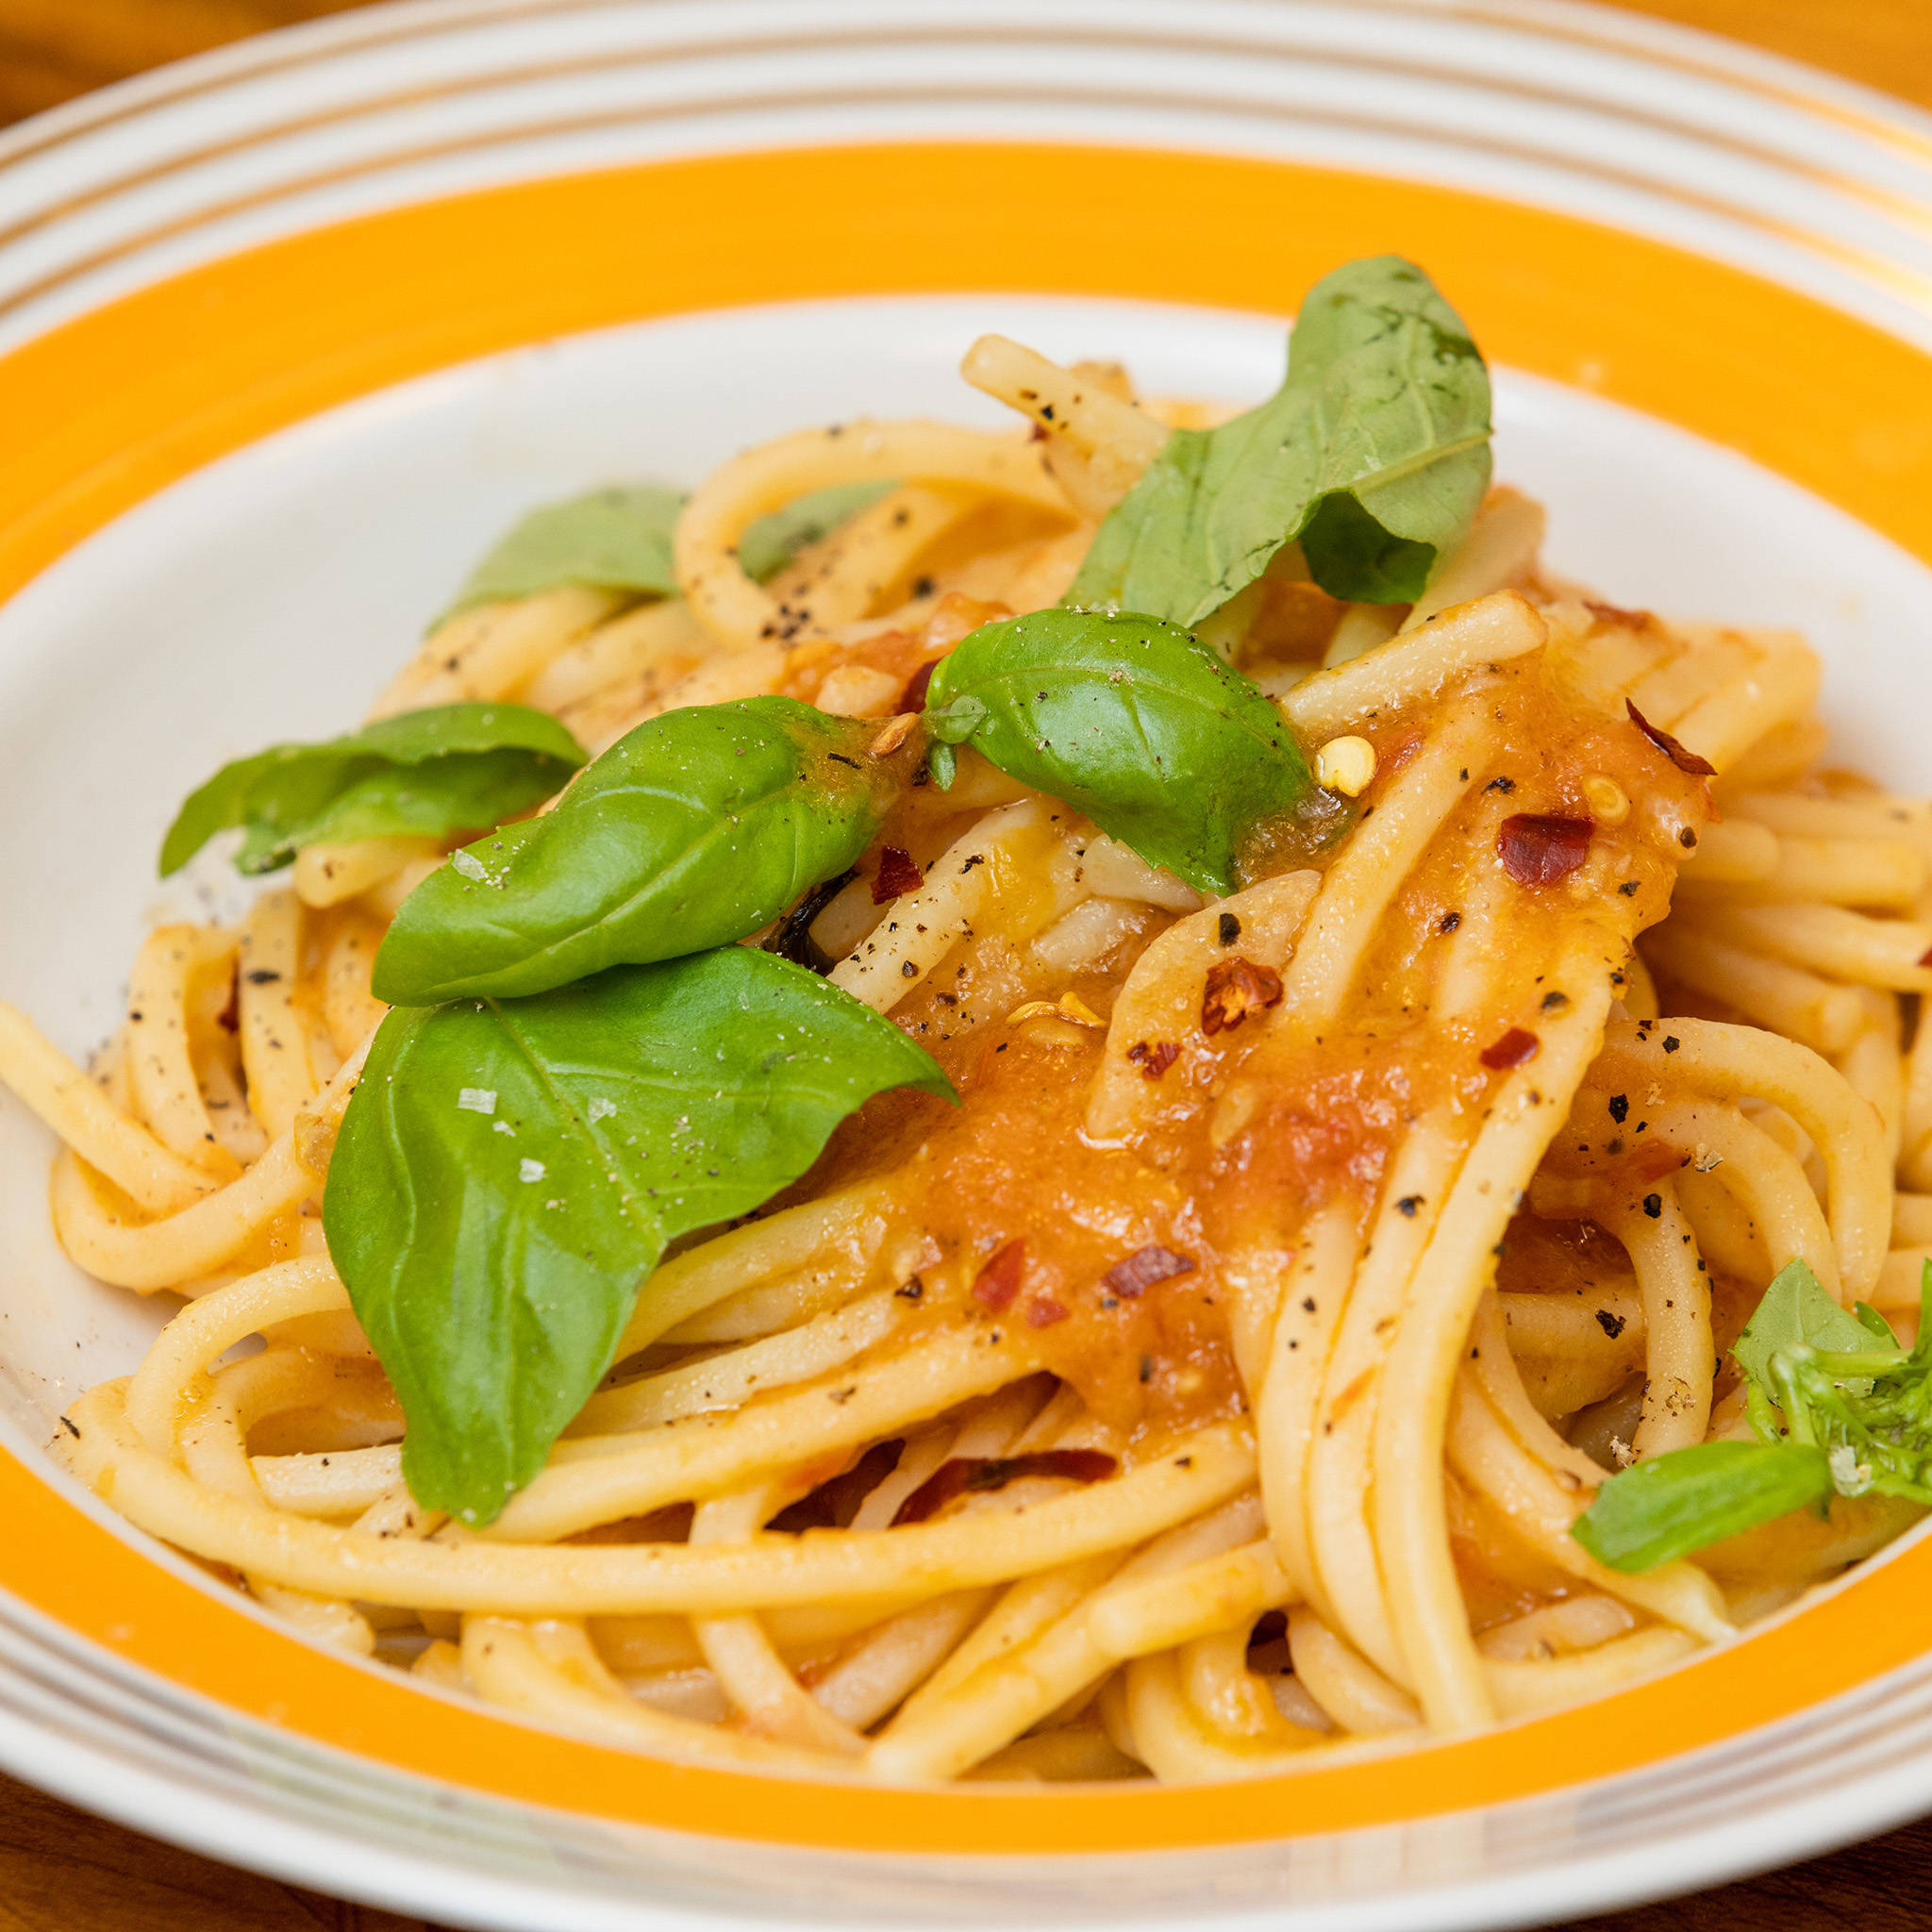 Carla Lalli Music's Pasta with 10-minute Spicy Grated Tomato Sauce